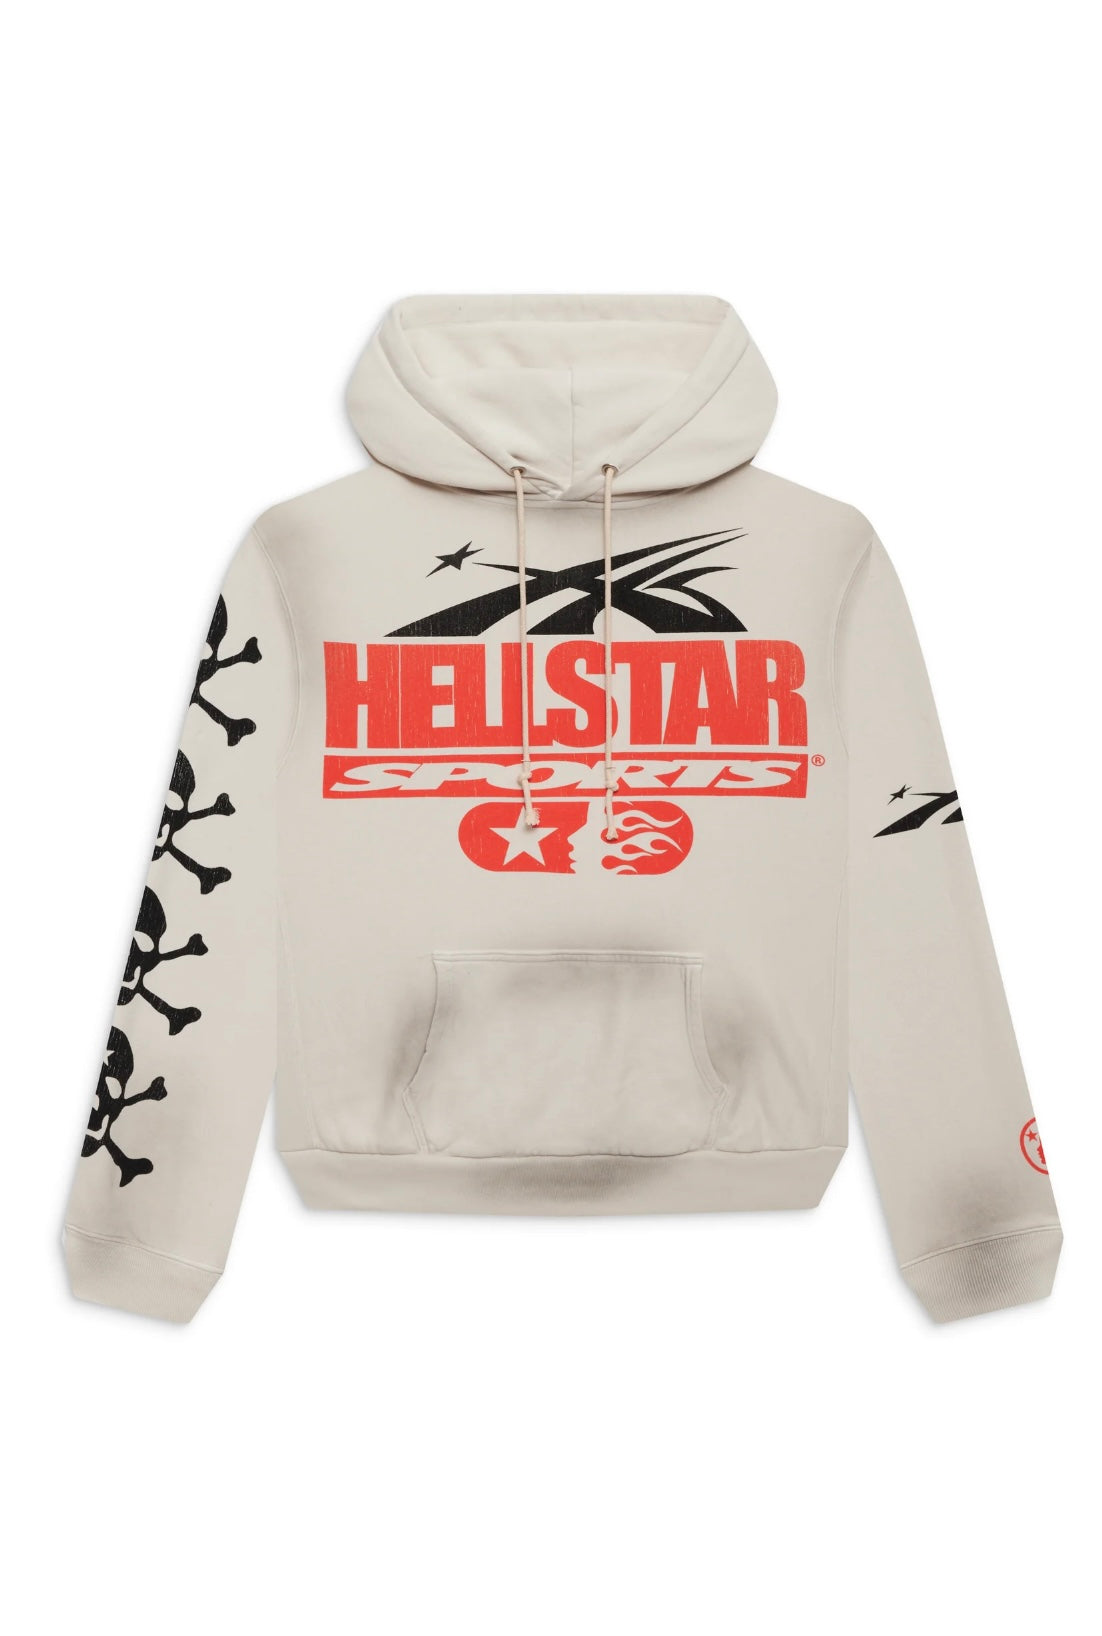 Hellstar “If you don’t like us beat us hoodie”